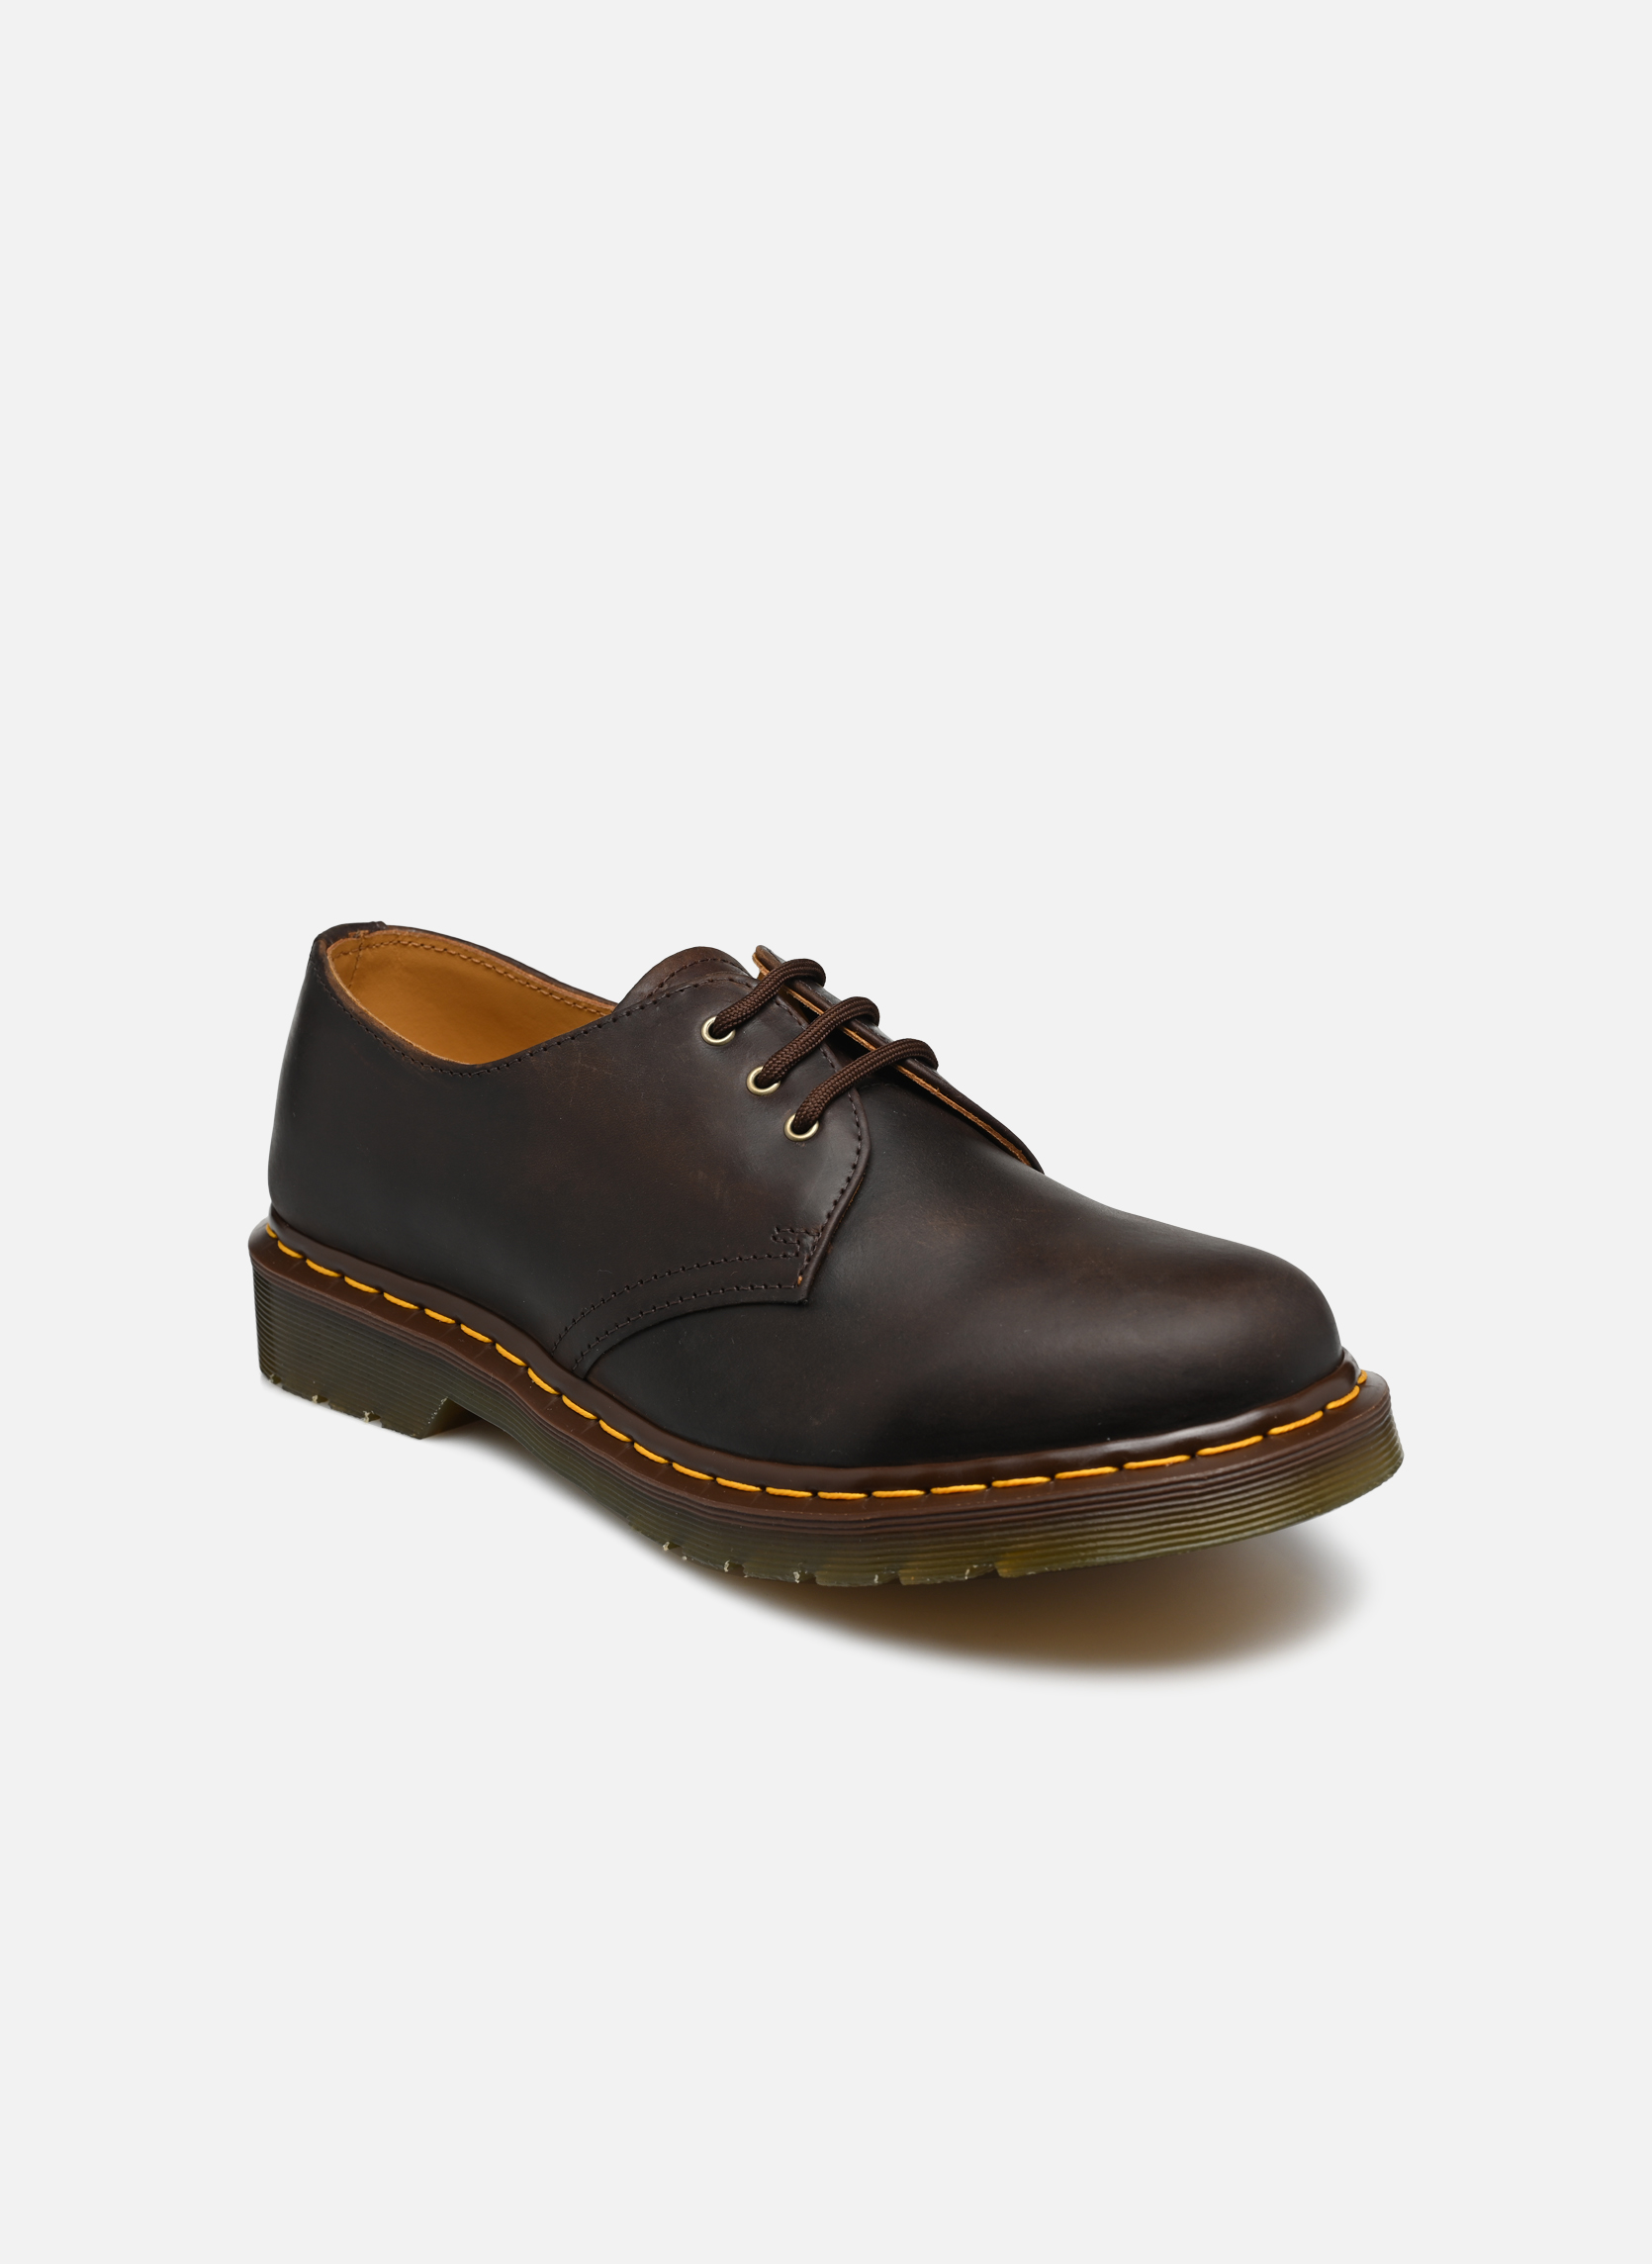 Dr. Martens 1461 59 Lace-up shoes in Brown at Sarenza.co.uk (82865)